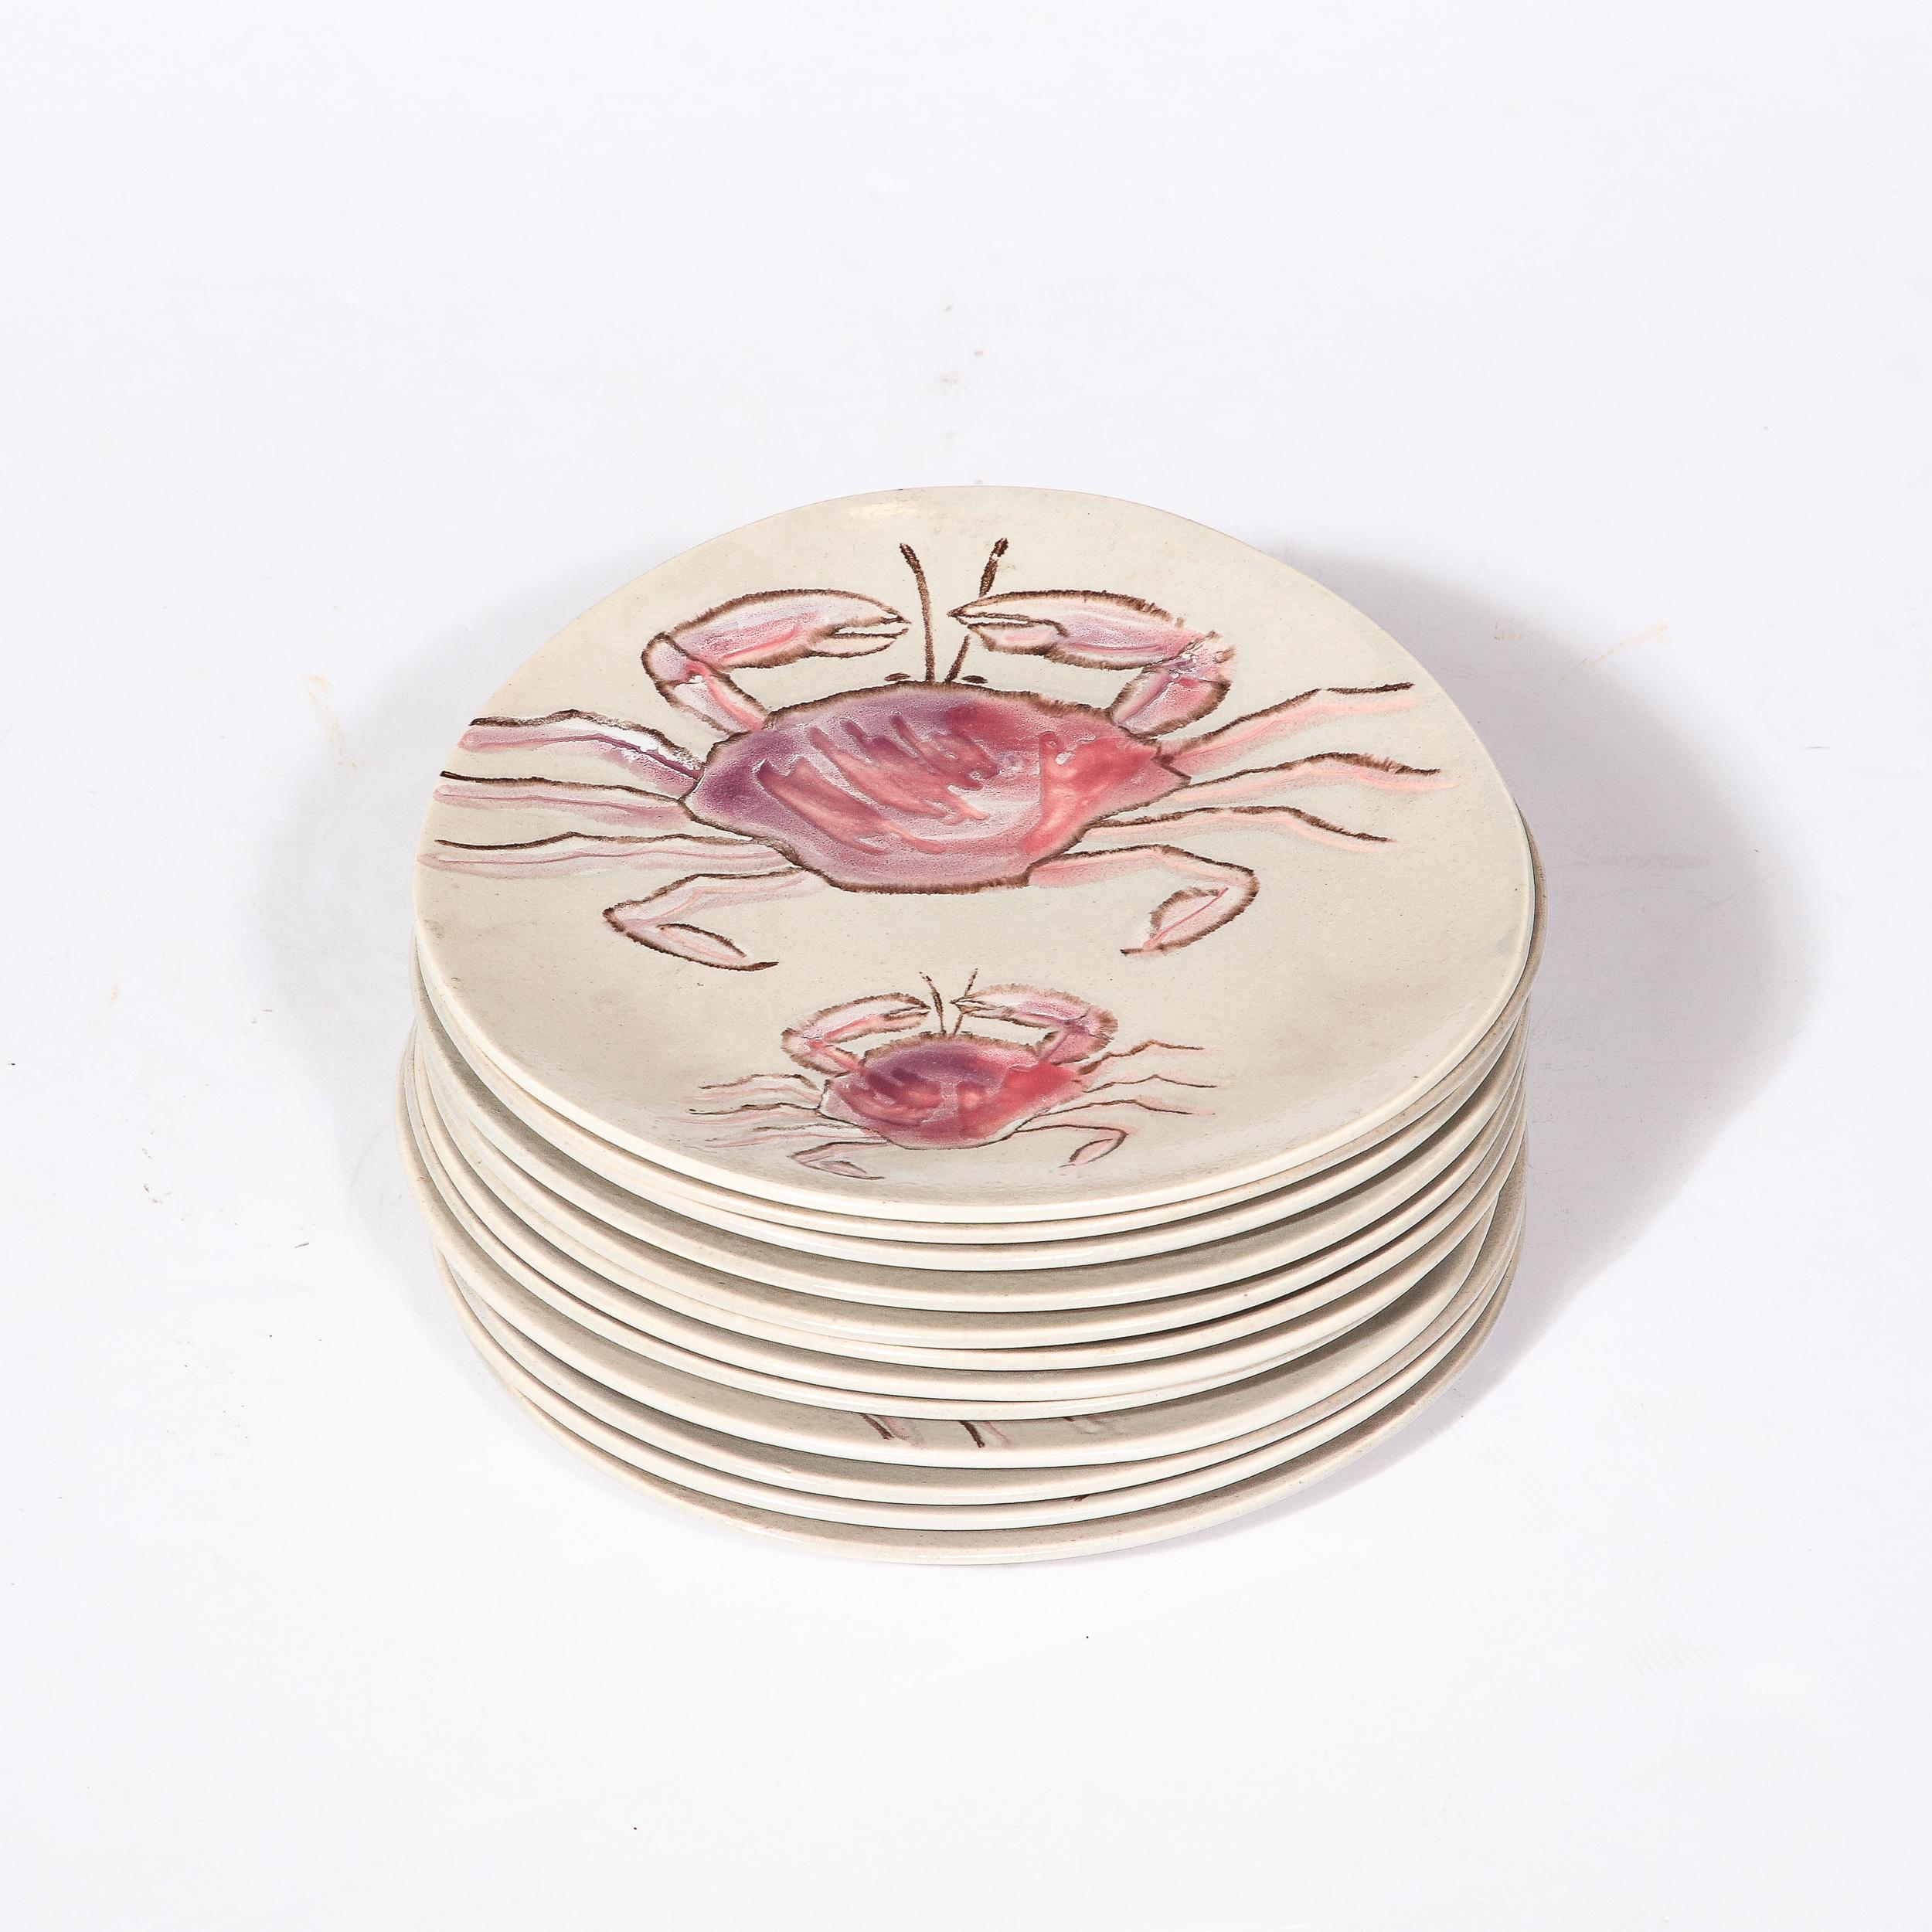 This charming Set of Twelve Mid-Century Modernist Plates in Hand-Painted Ceramic by MBFA Pornic originates from France, Circa 1960. Featuring a beautiful variety of sea creatures in a stunning array of hand-painted Mauve purple hues with white and